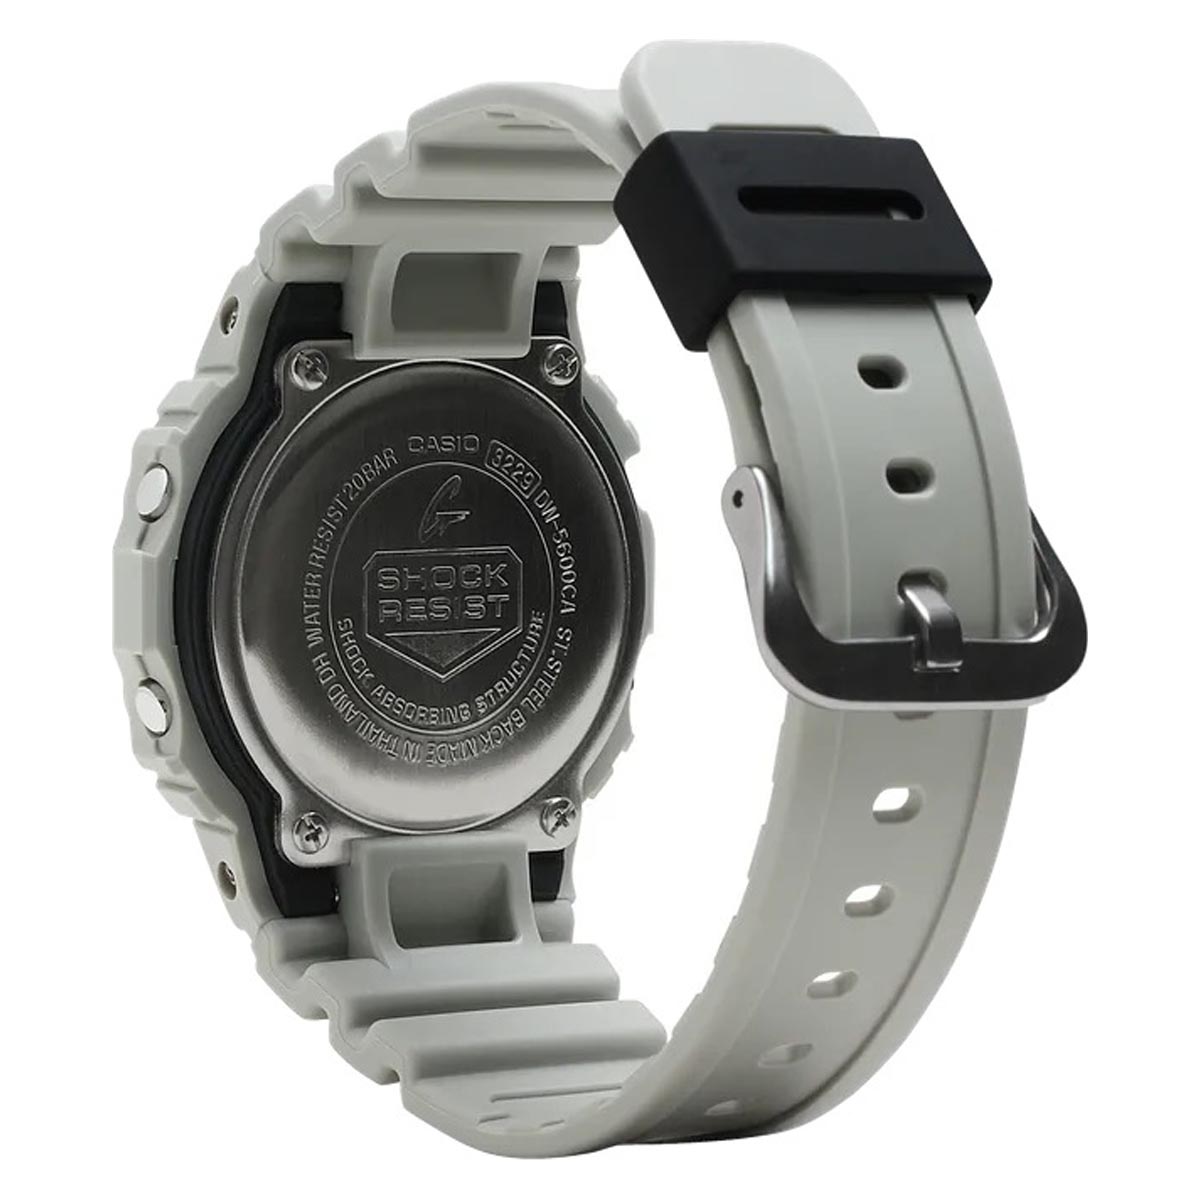 G Shock Mens Watch with Black Dial and Tan Resin Strap (quartz movement)